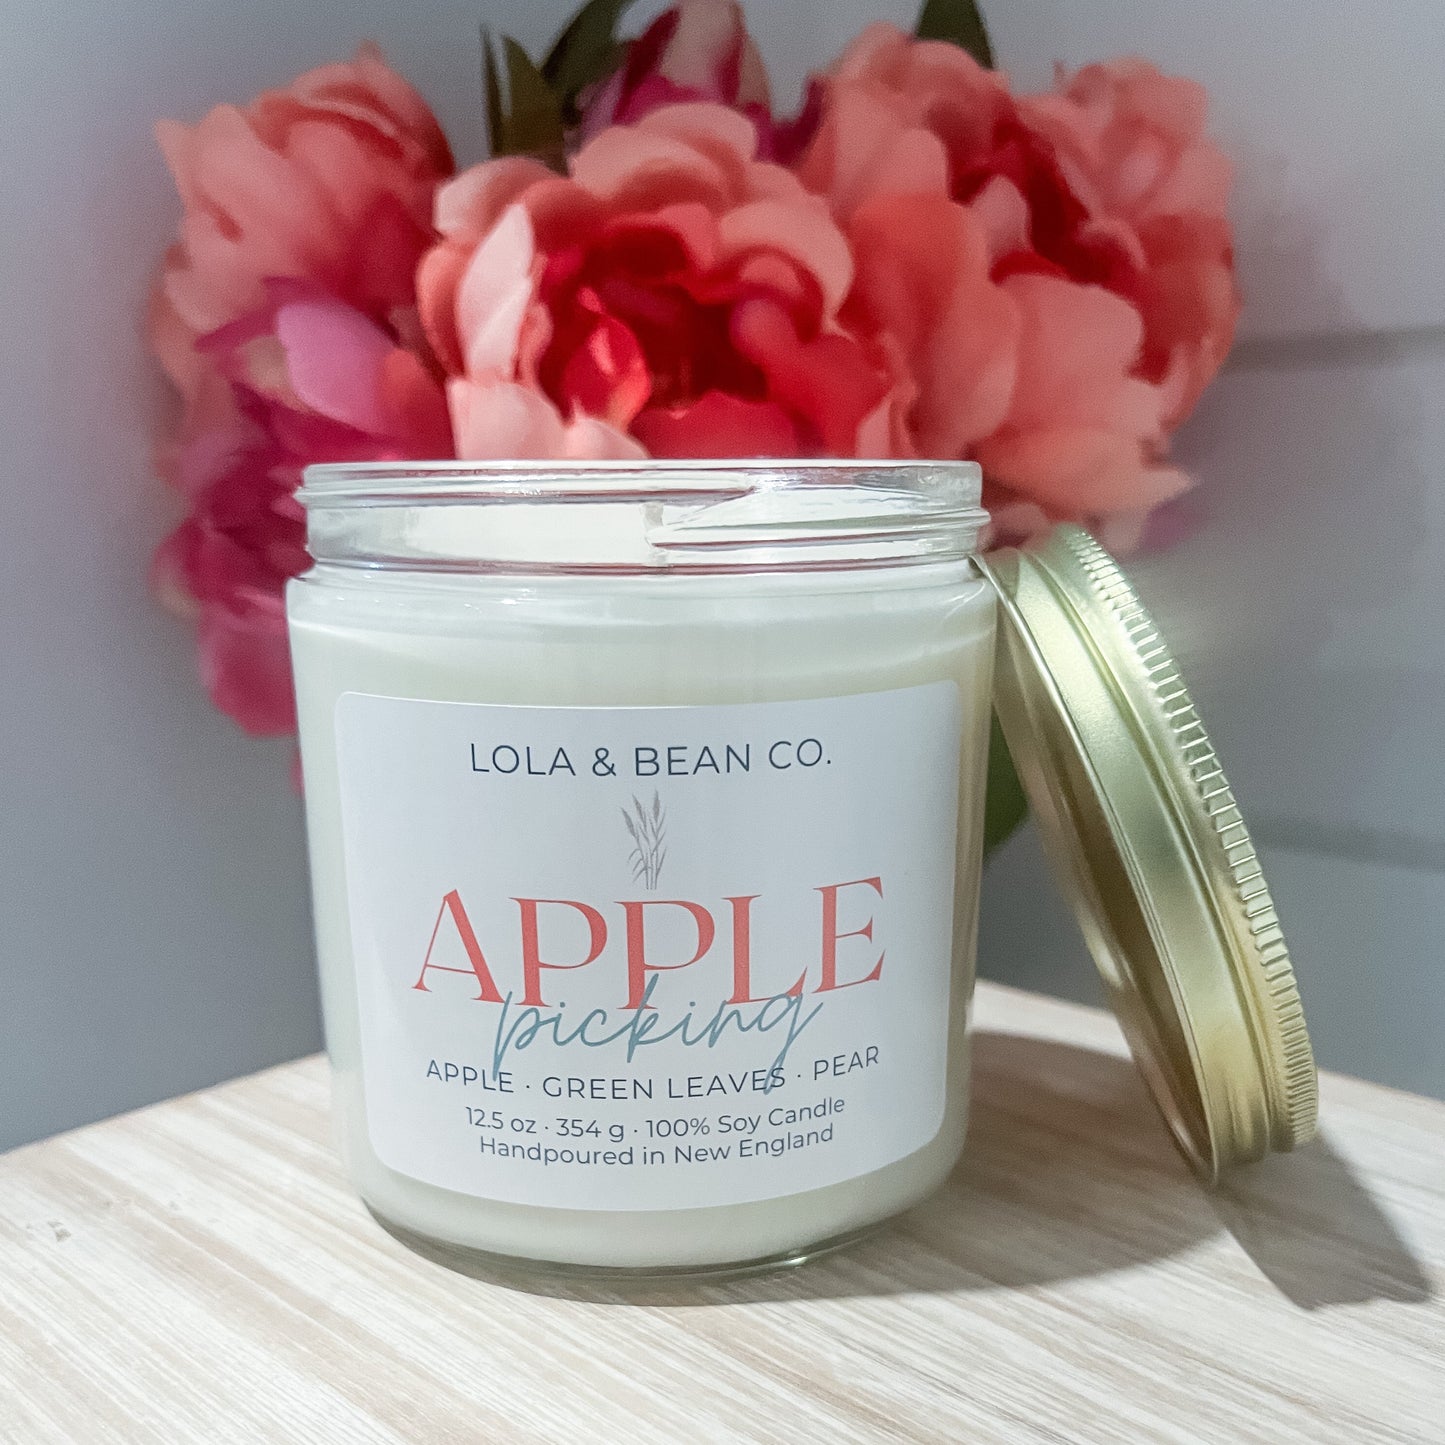 Apple Picking Soy Candle